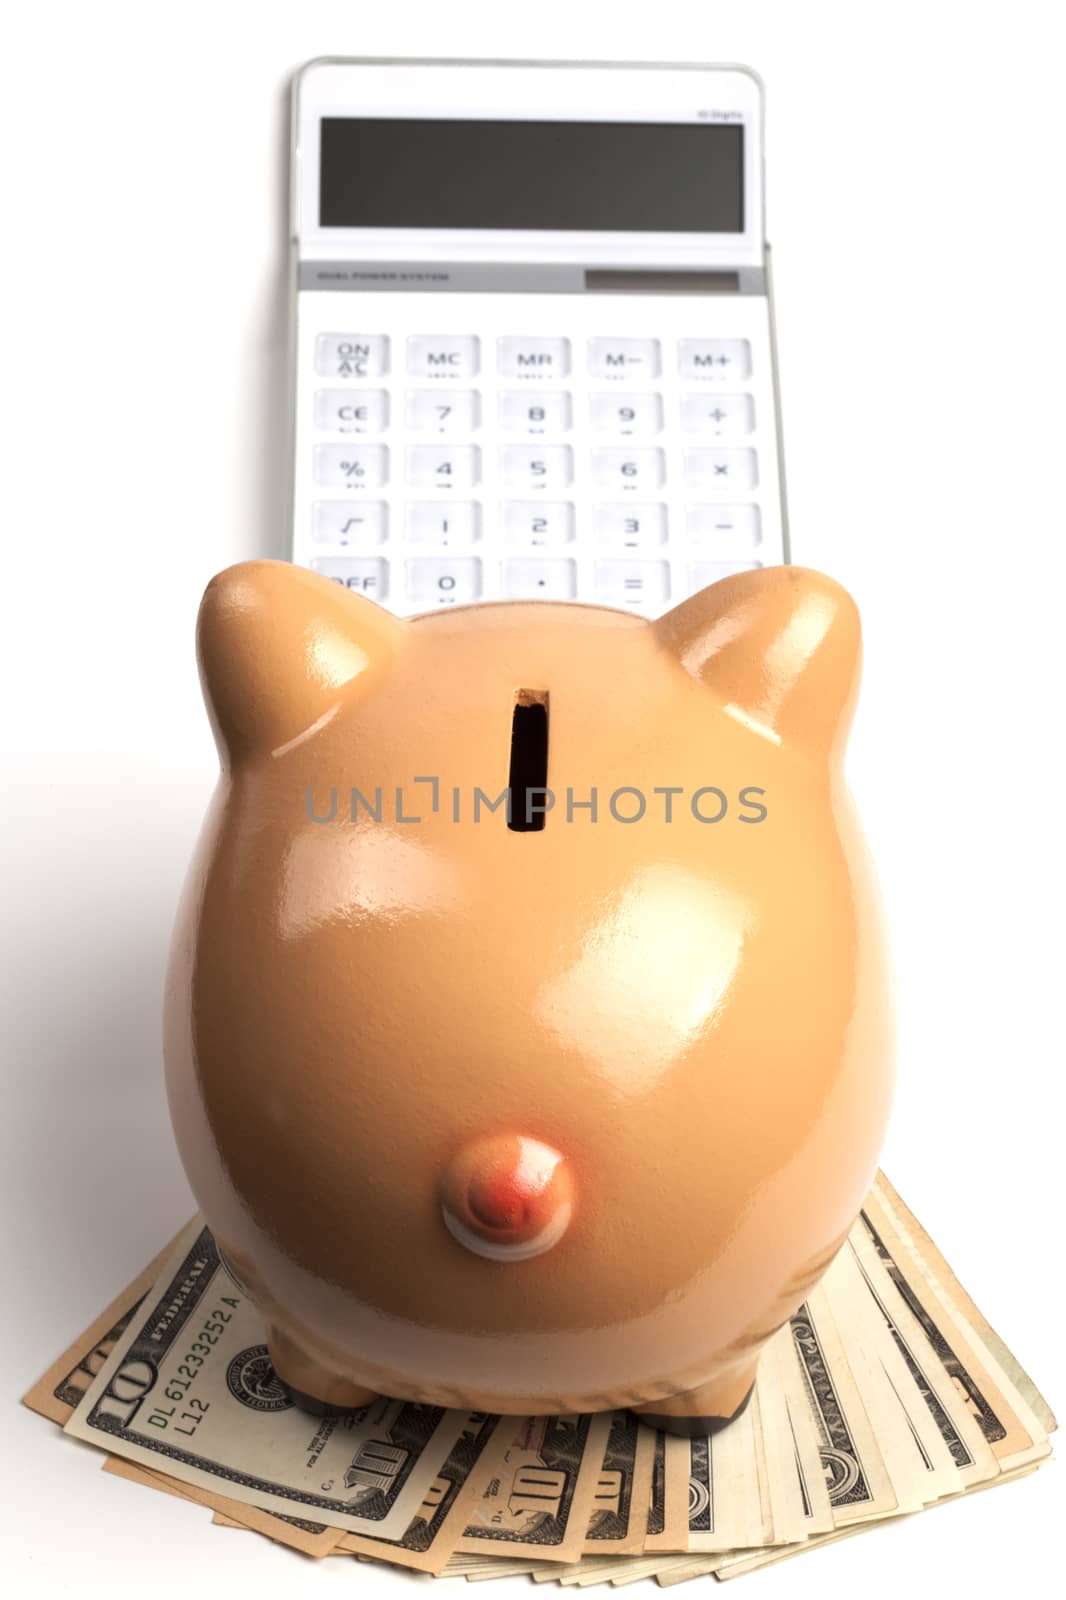 Piggy Bank On Dollars and Calculator Isolated on White Background